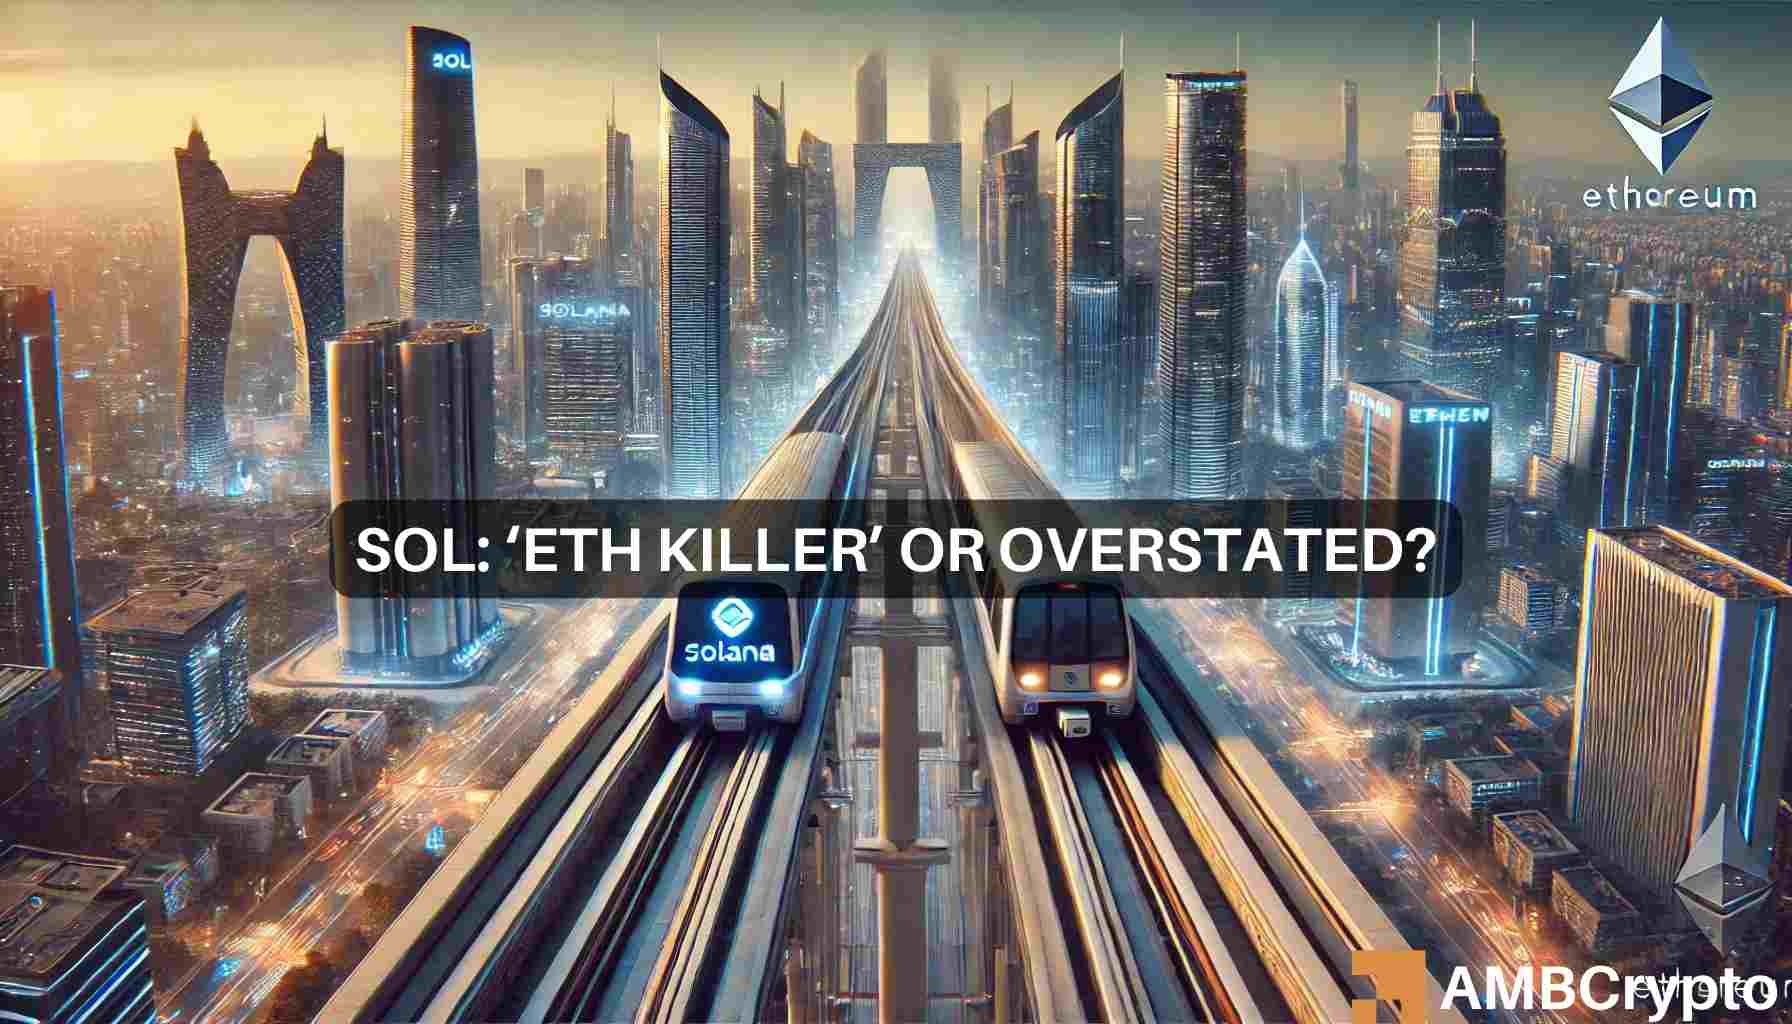 Solans vs Ethereum - Here's where insiders stand on 'overvaluation' claims